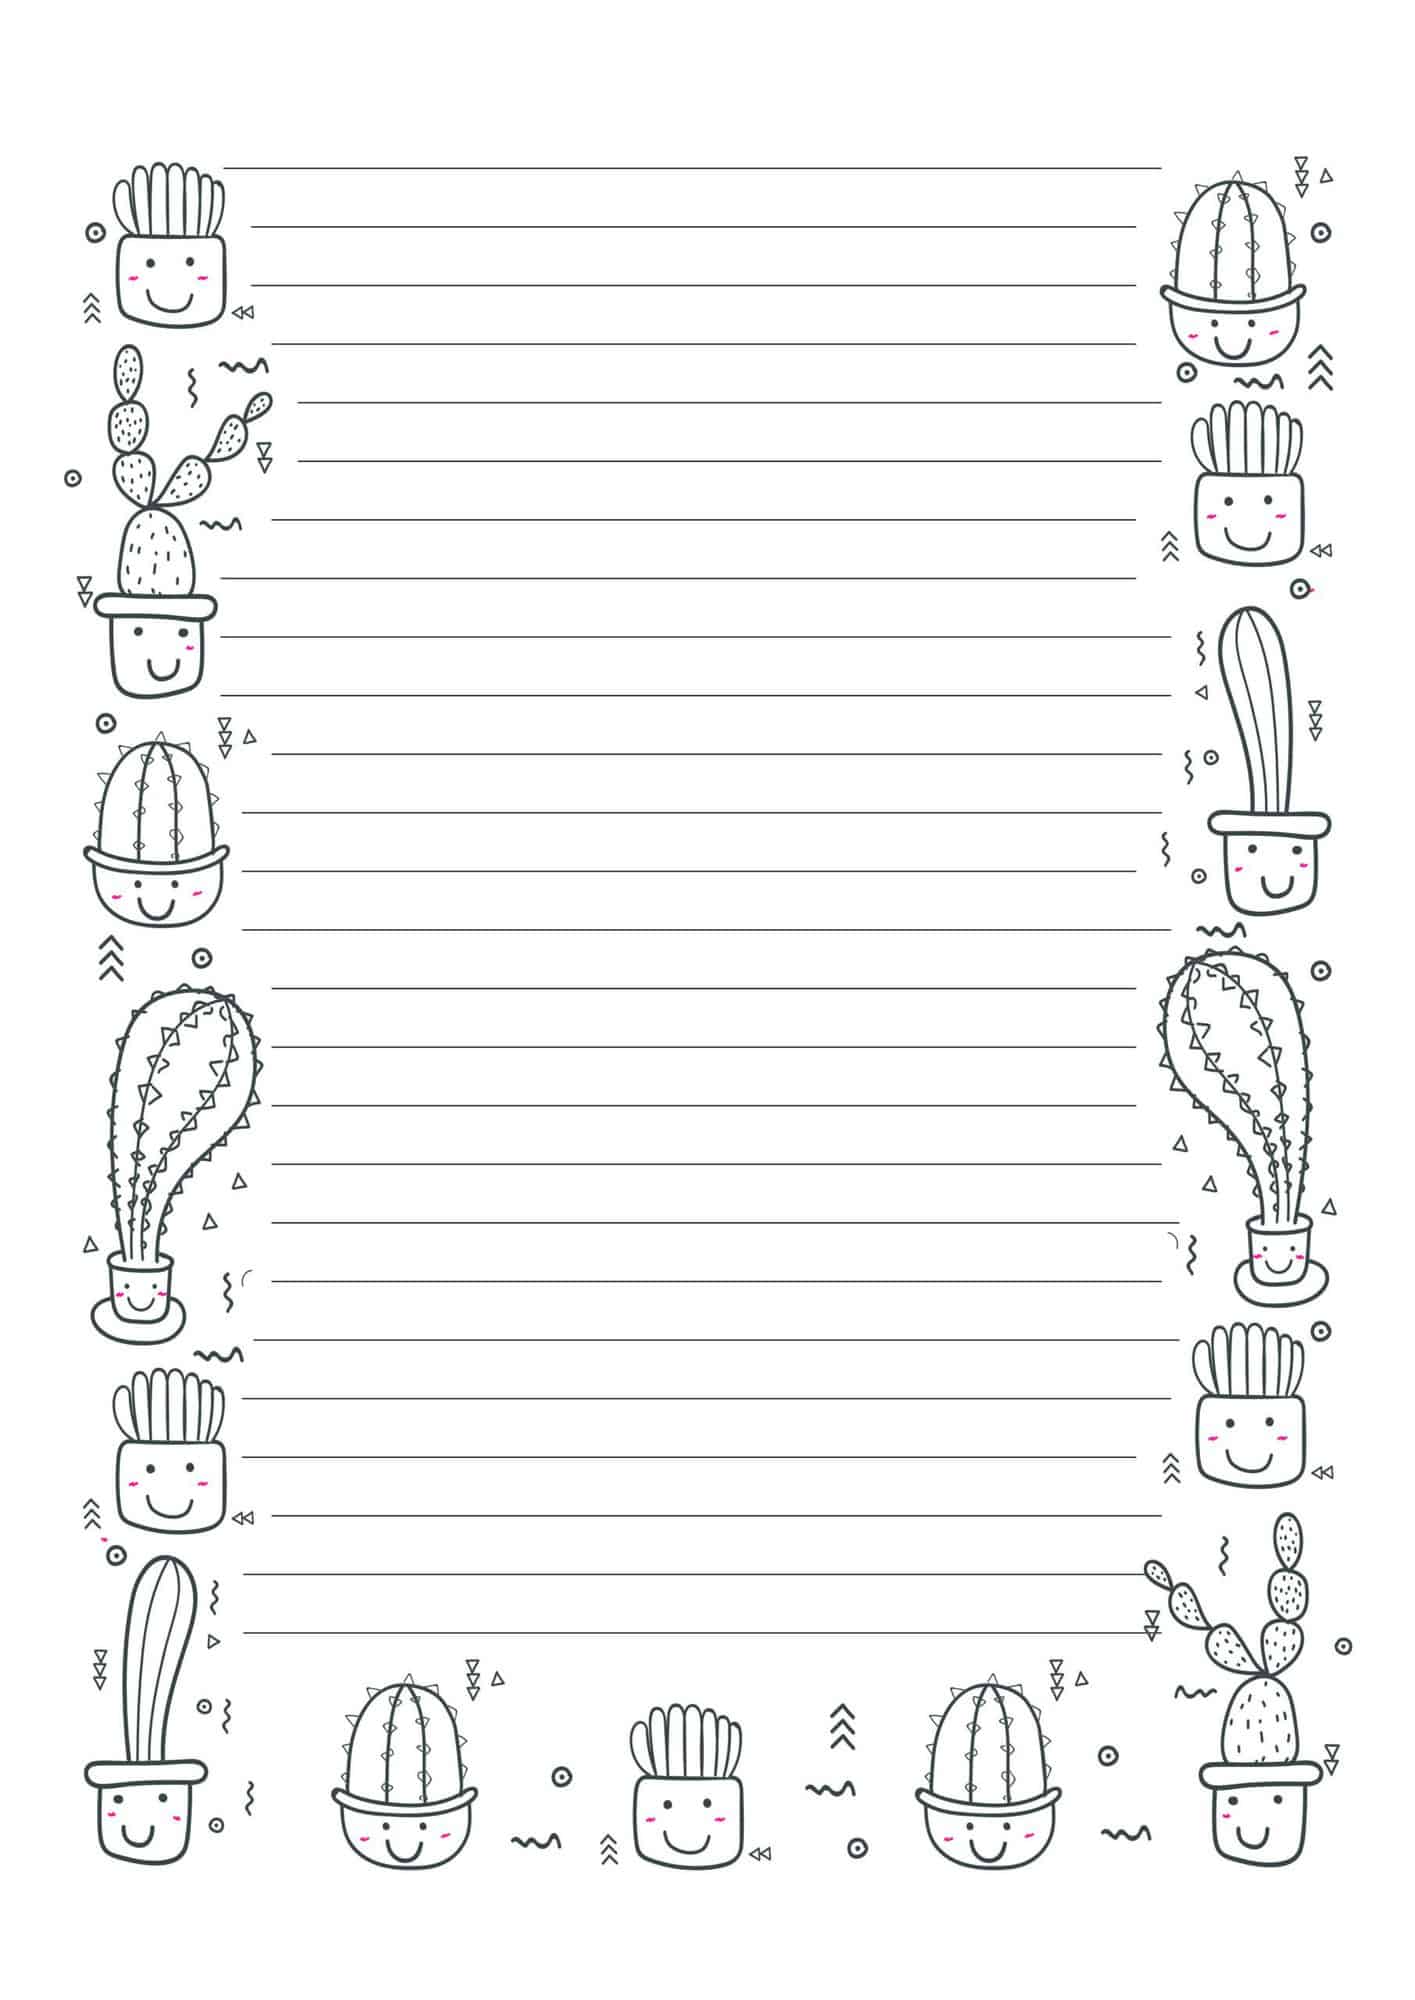 Lined paper template with animated cactus border.